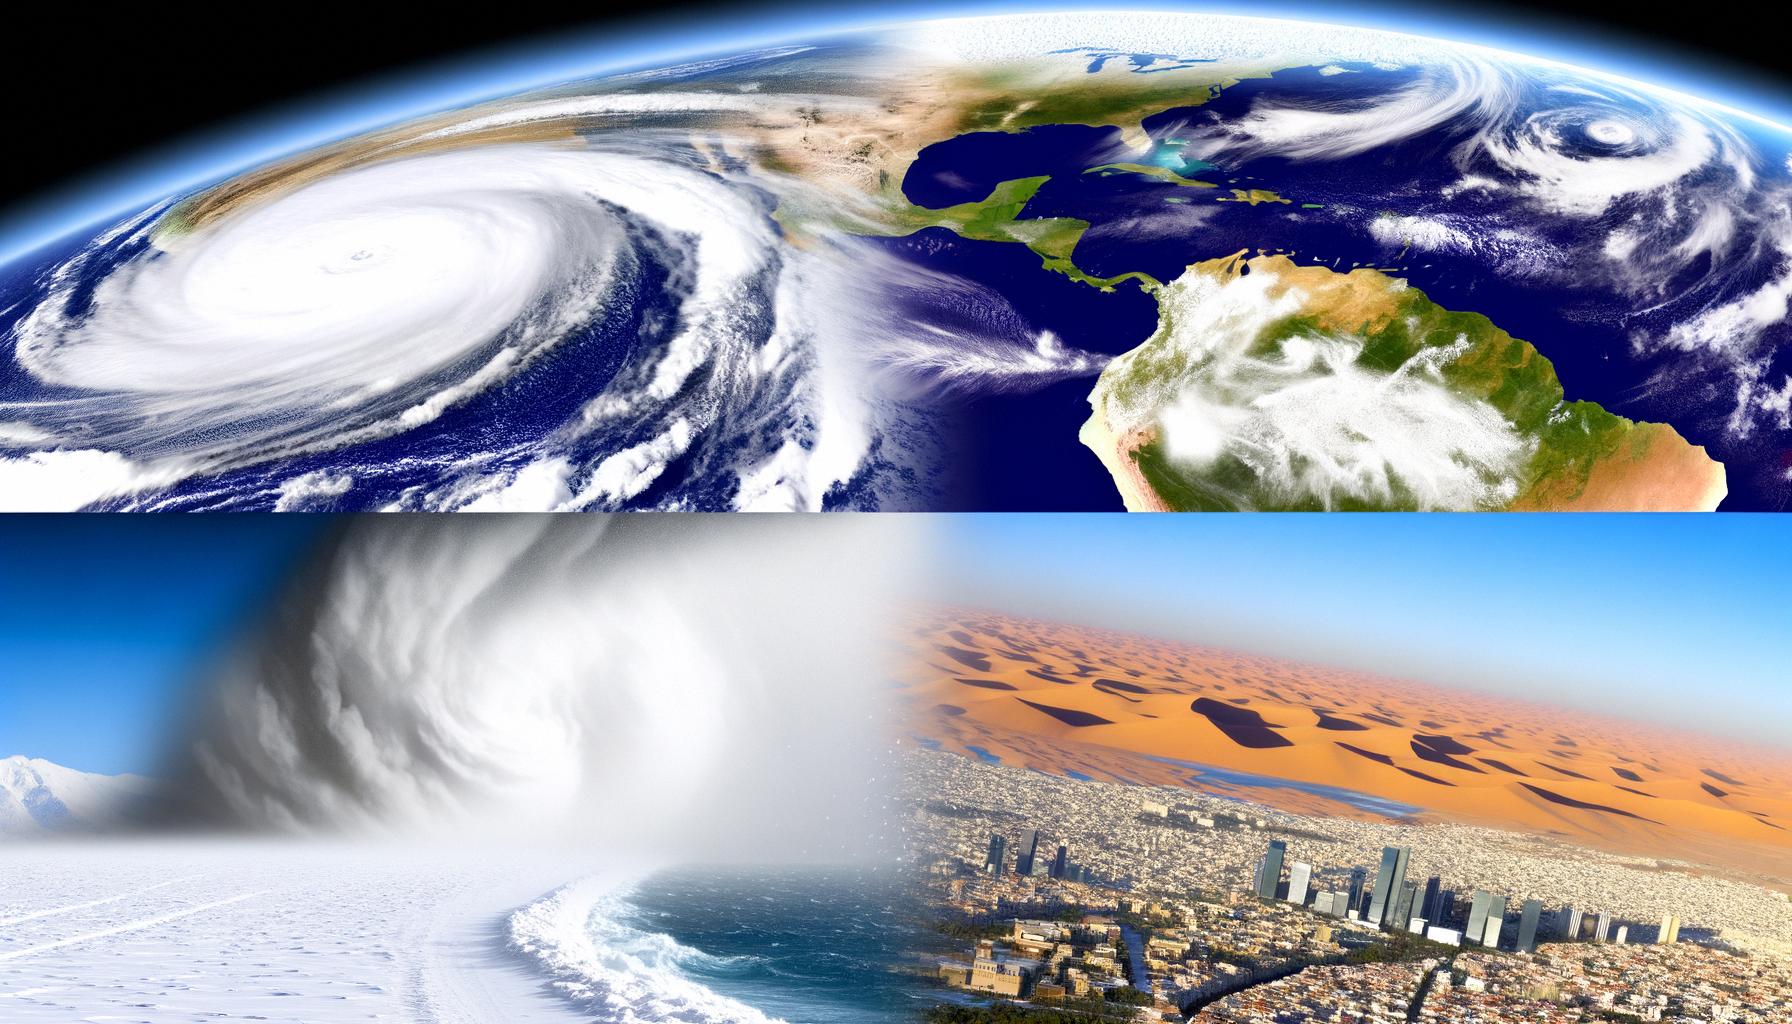 Different global regions are simultaneously impacted by severe weather conditions, highlighting climate challenges.